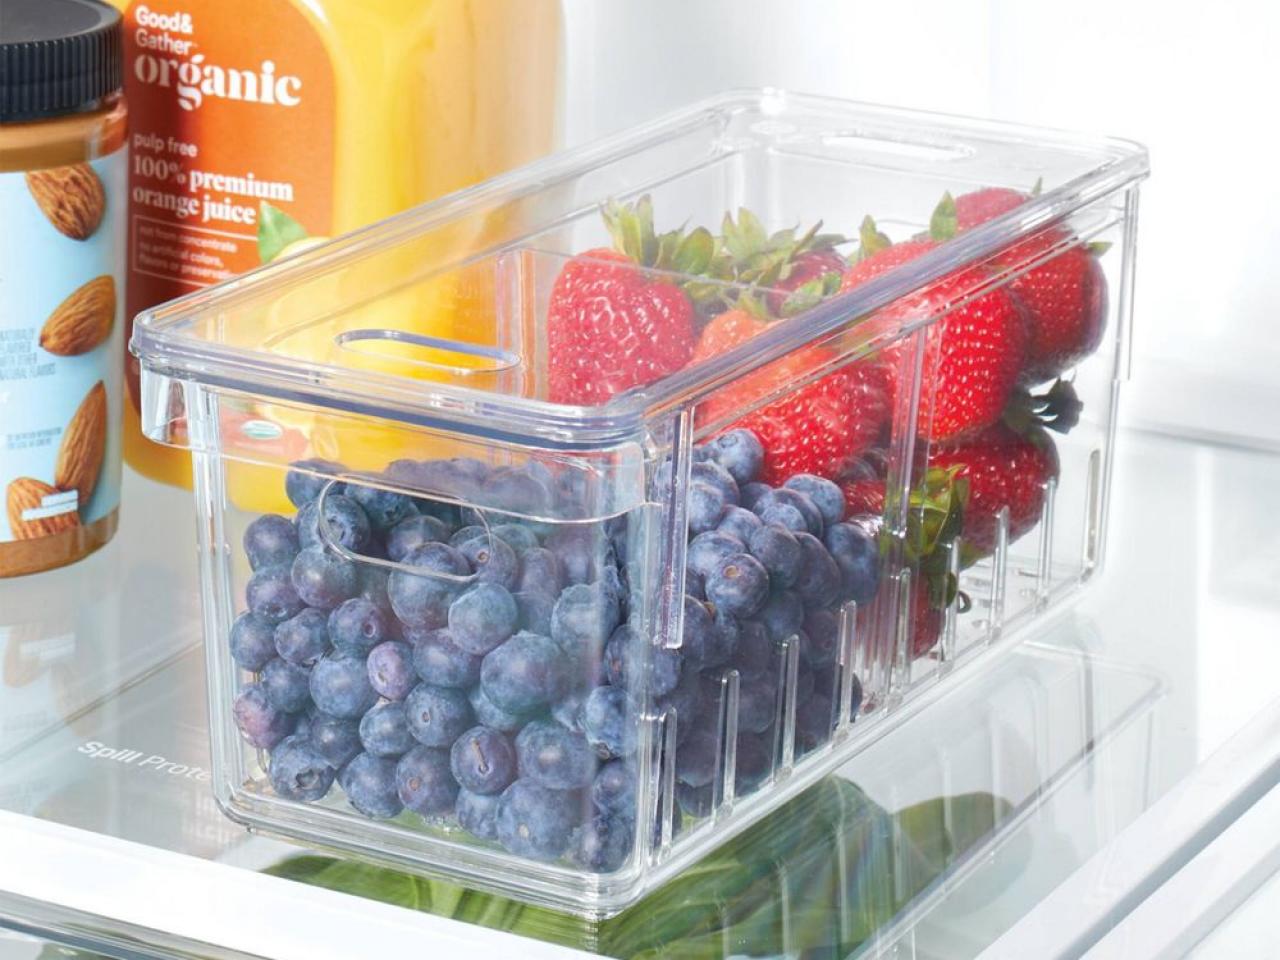 https://food.fnr.sndimg.com/content/dam/images/food/products/2023/12/12/rx_target_divided-berry-bin-with-lid.jpeg.rend.hgtvcom.1280.960.suffix/1702413359149.jpeg